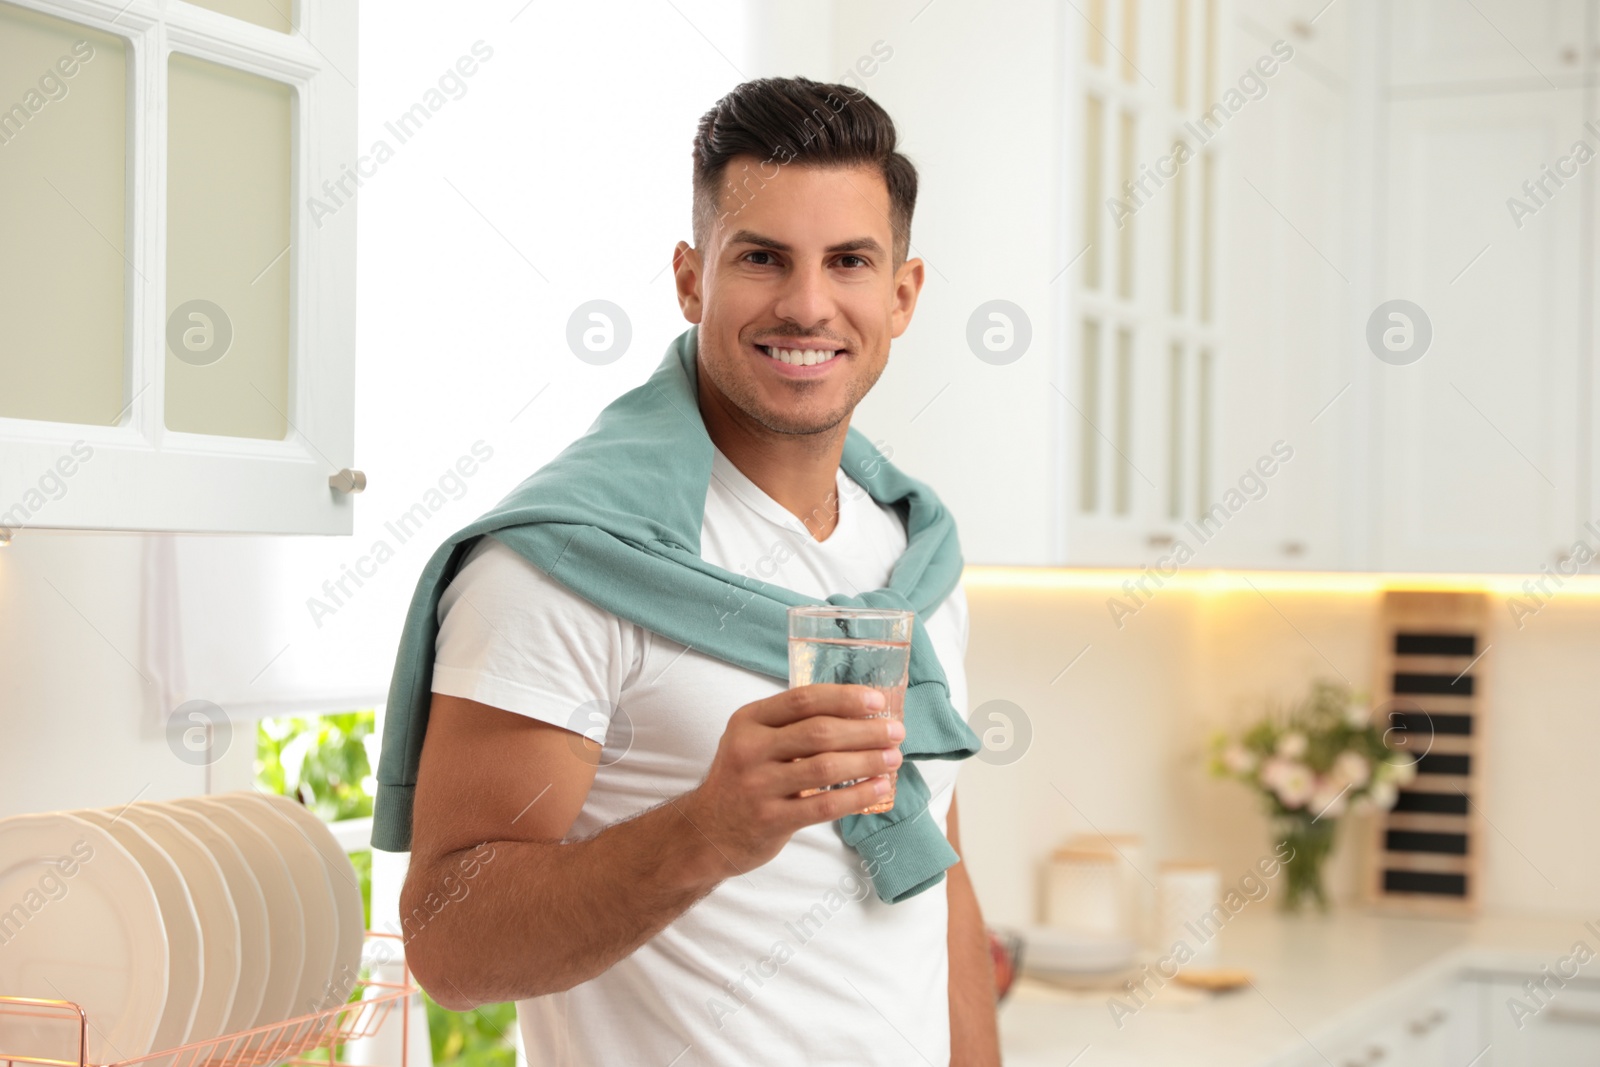 Photo of Man holding glass of pure water in kitchen